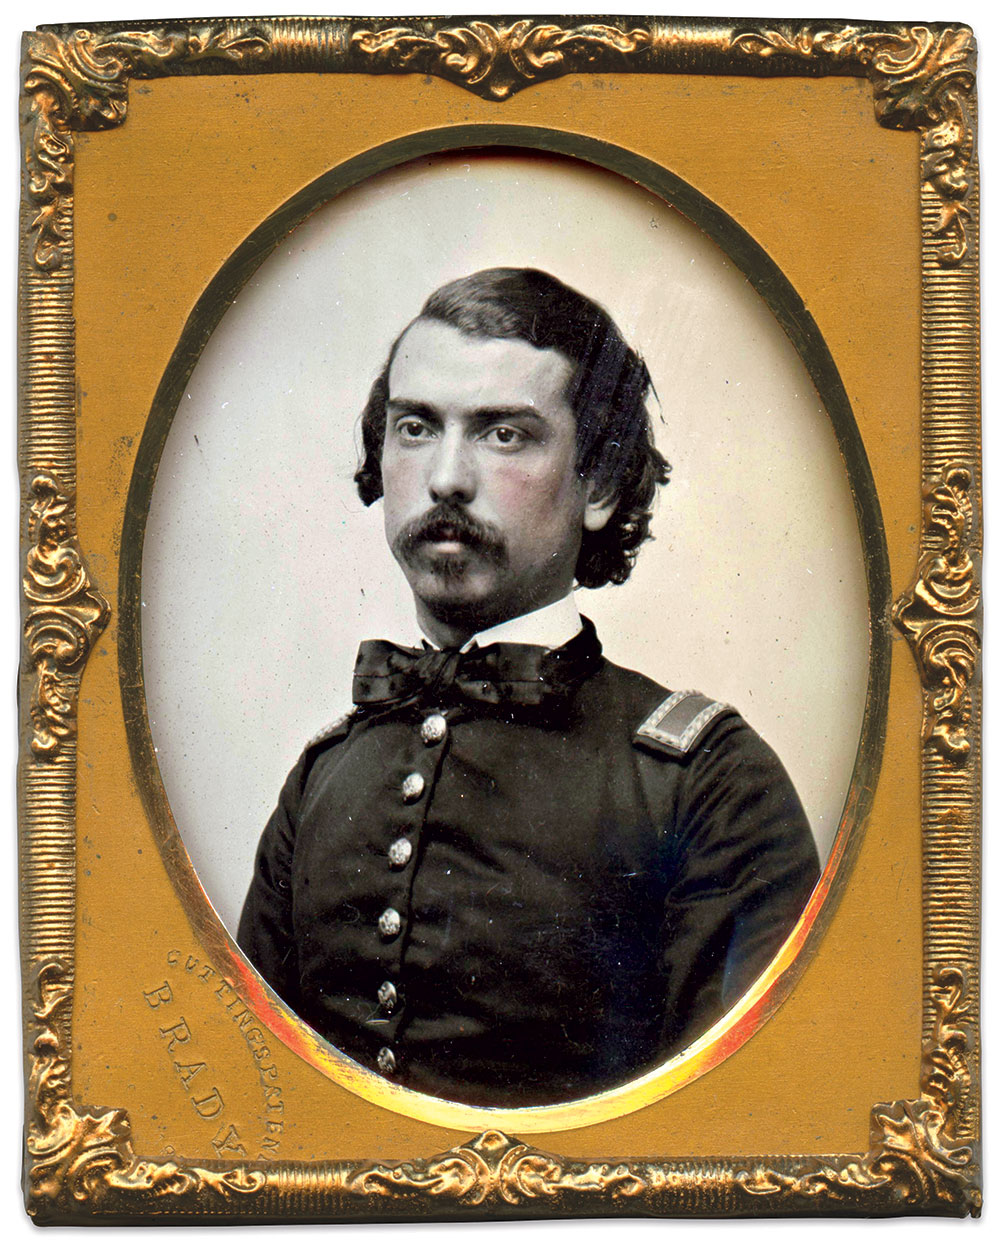 2nd Lt. Worth, circa 1859-1860. Sixth plate ambrotype by Mathew Brady of New York City. Paul Russinoff Collection.